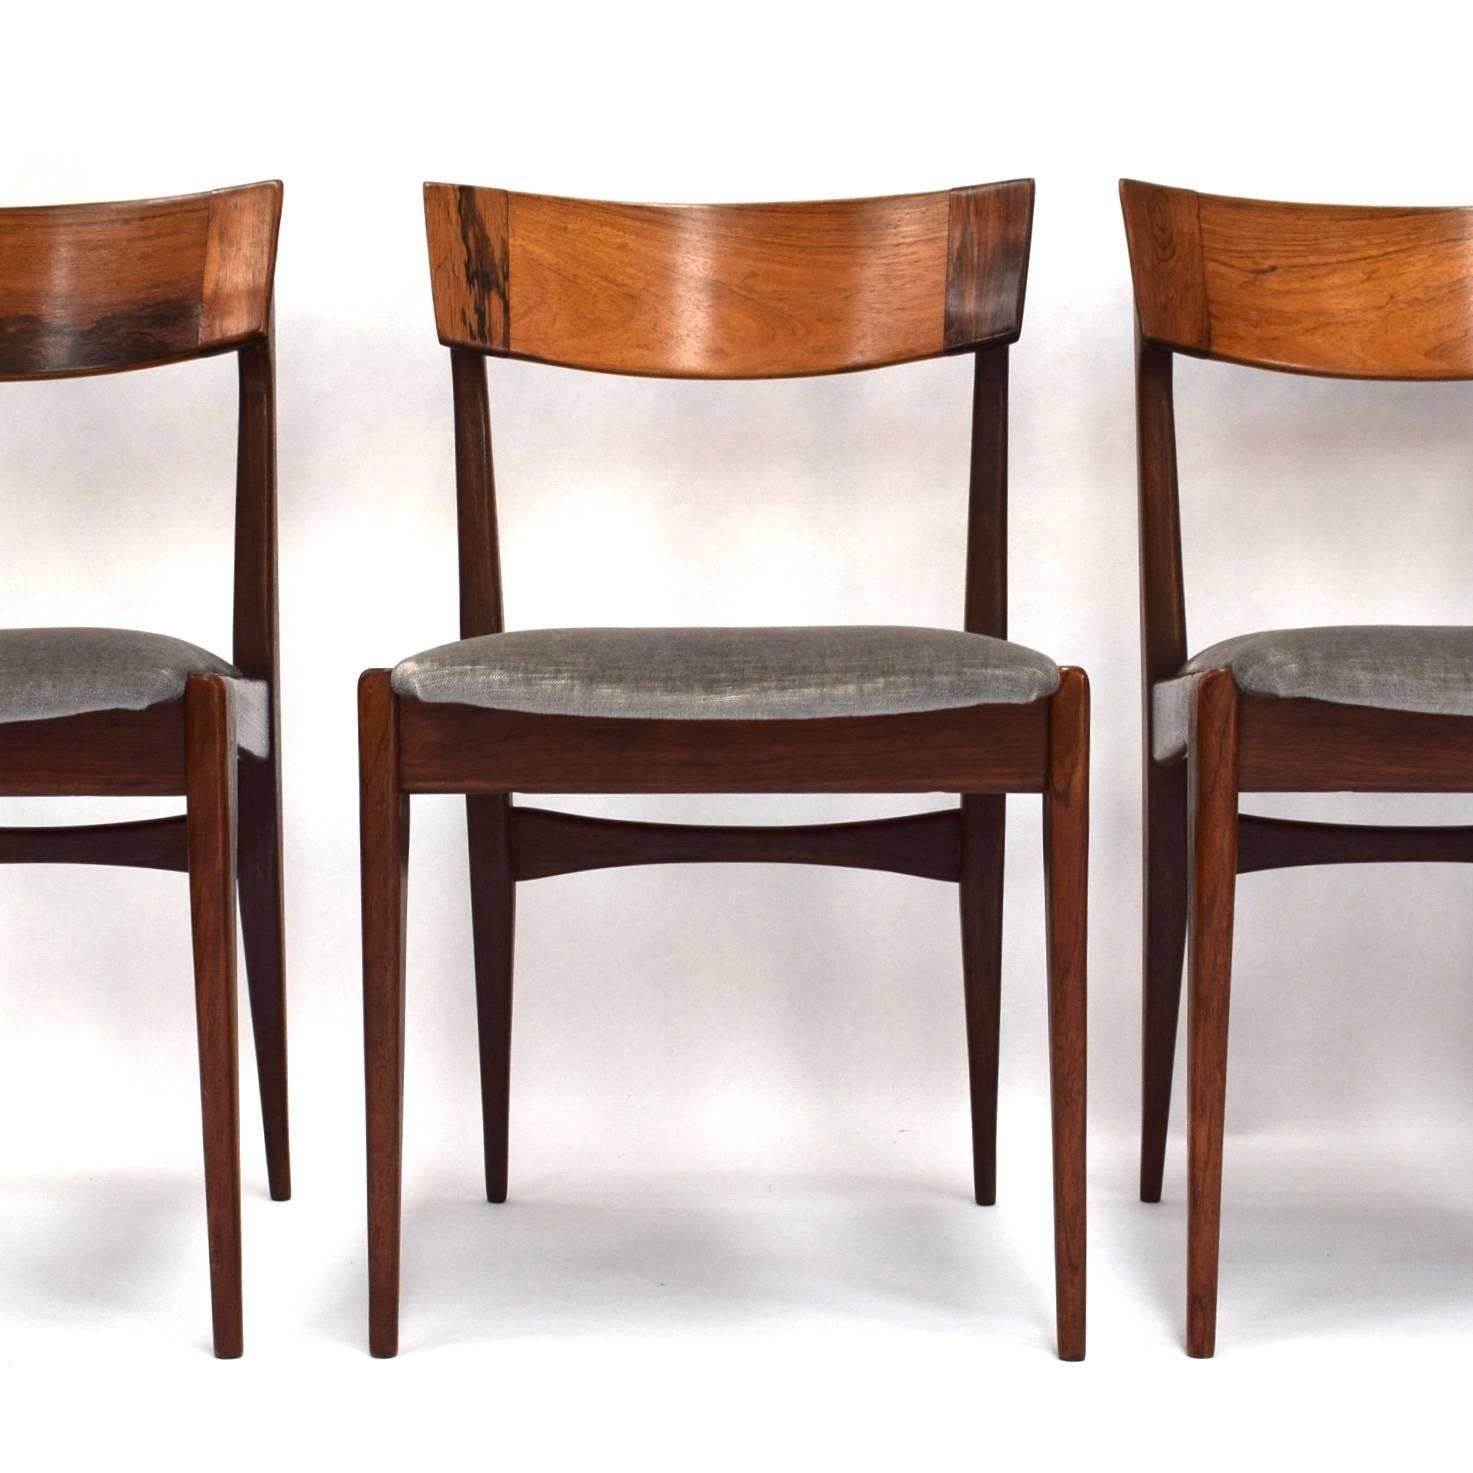 Mid-20th Century Four Danish Dining Chairs in Brazilian Rosewood, 1950s